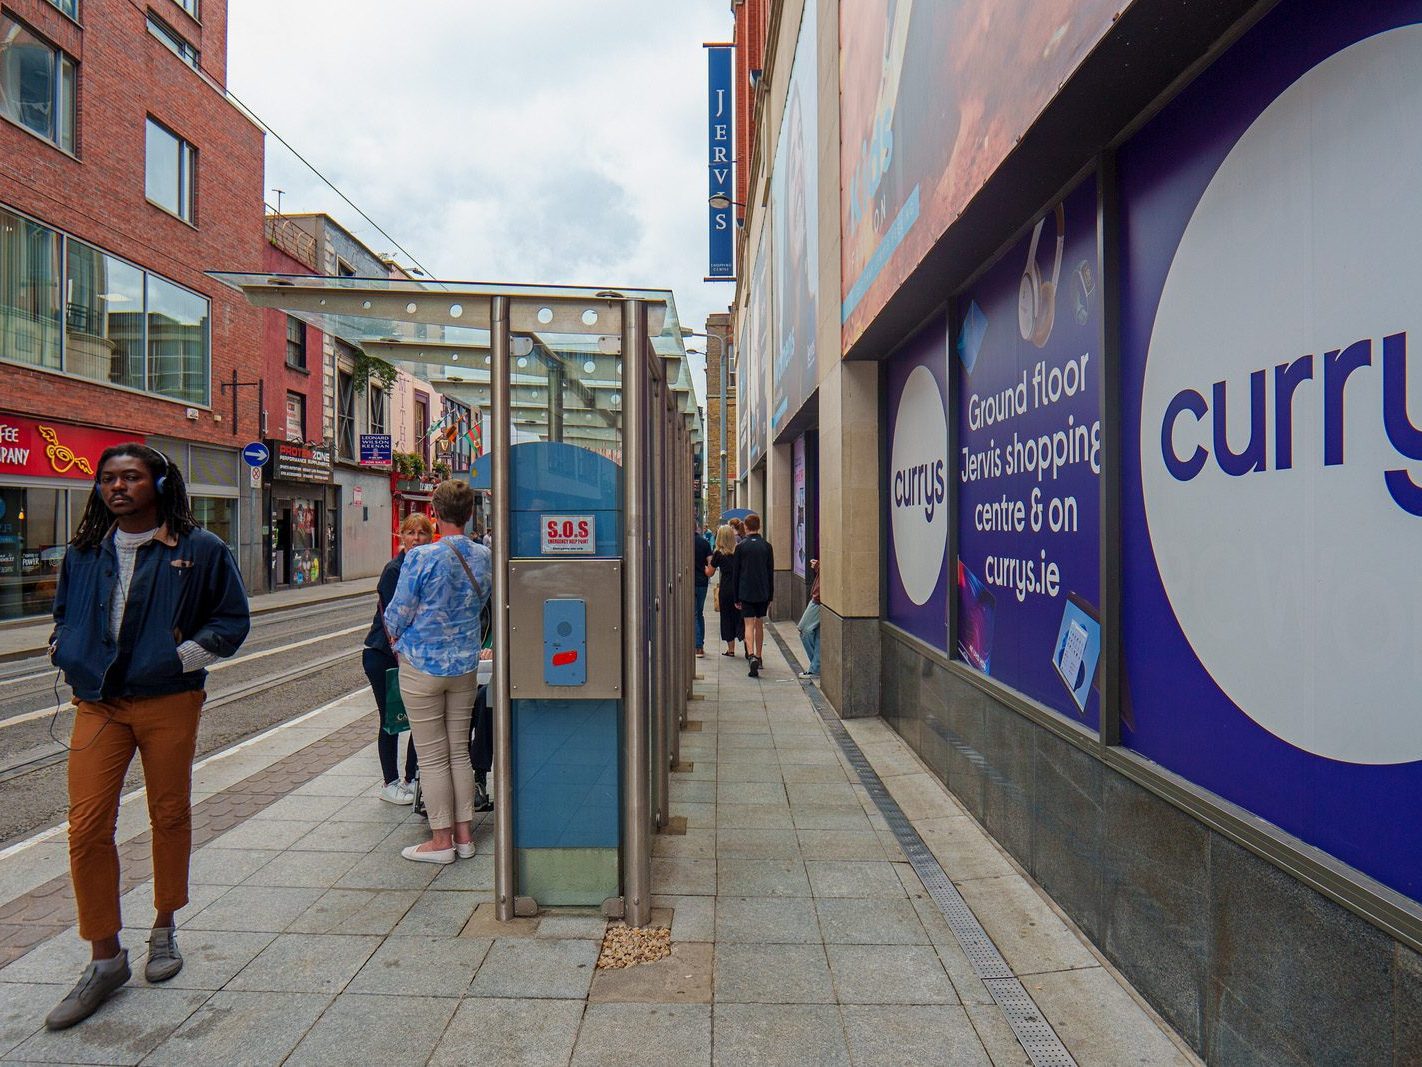 THE LUAS TRAM STOP [KNOWN AS JERVIS EVEN THOUGH IT IS ON UPPER ABBEY STREET] 002